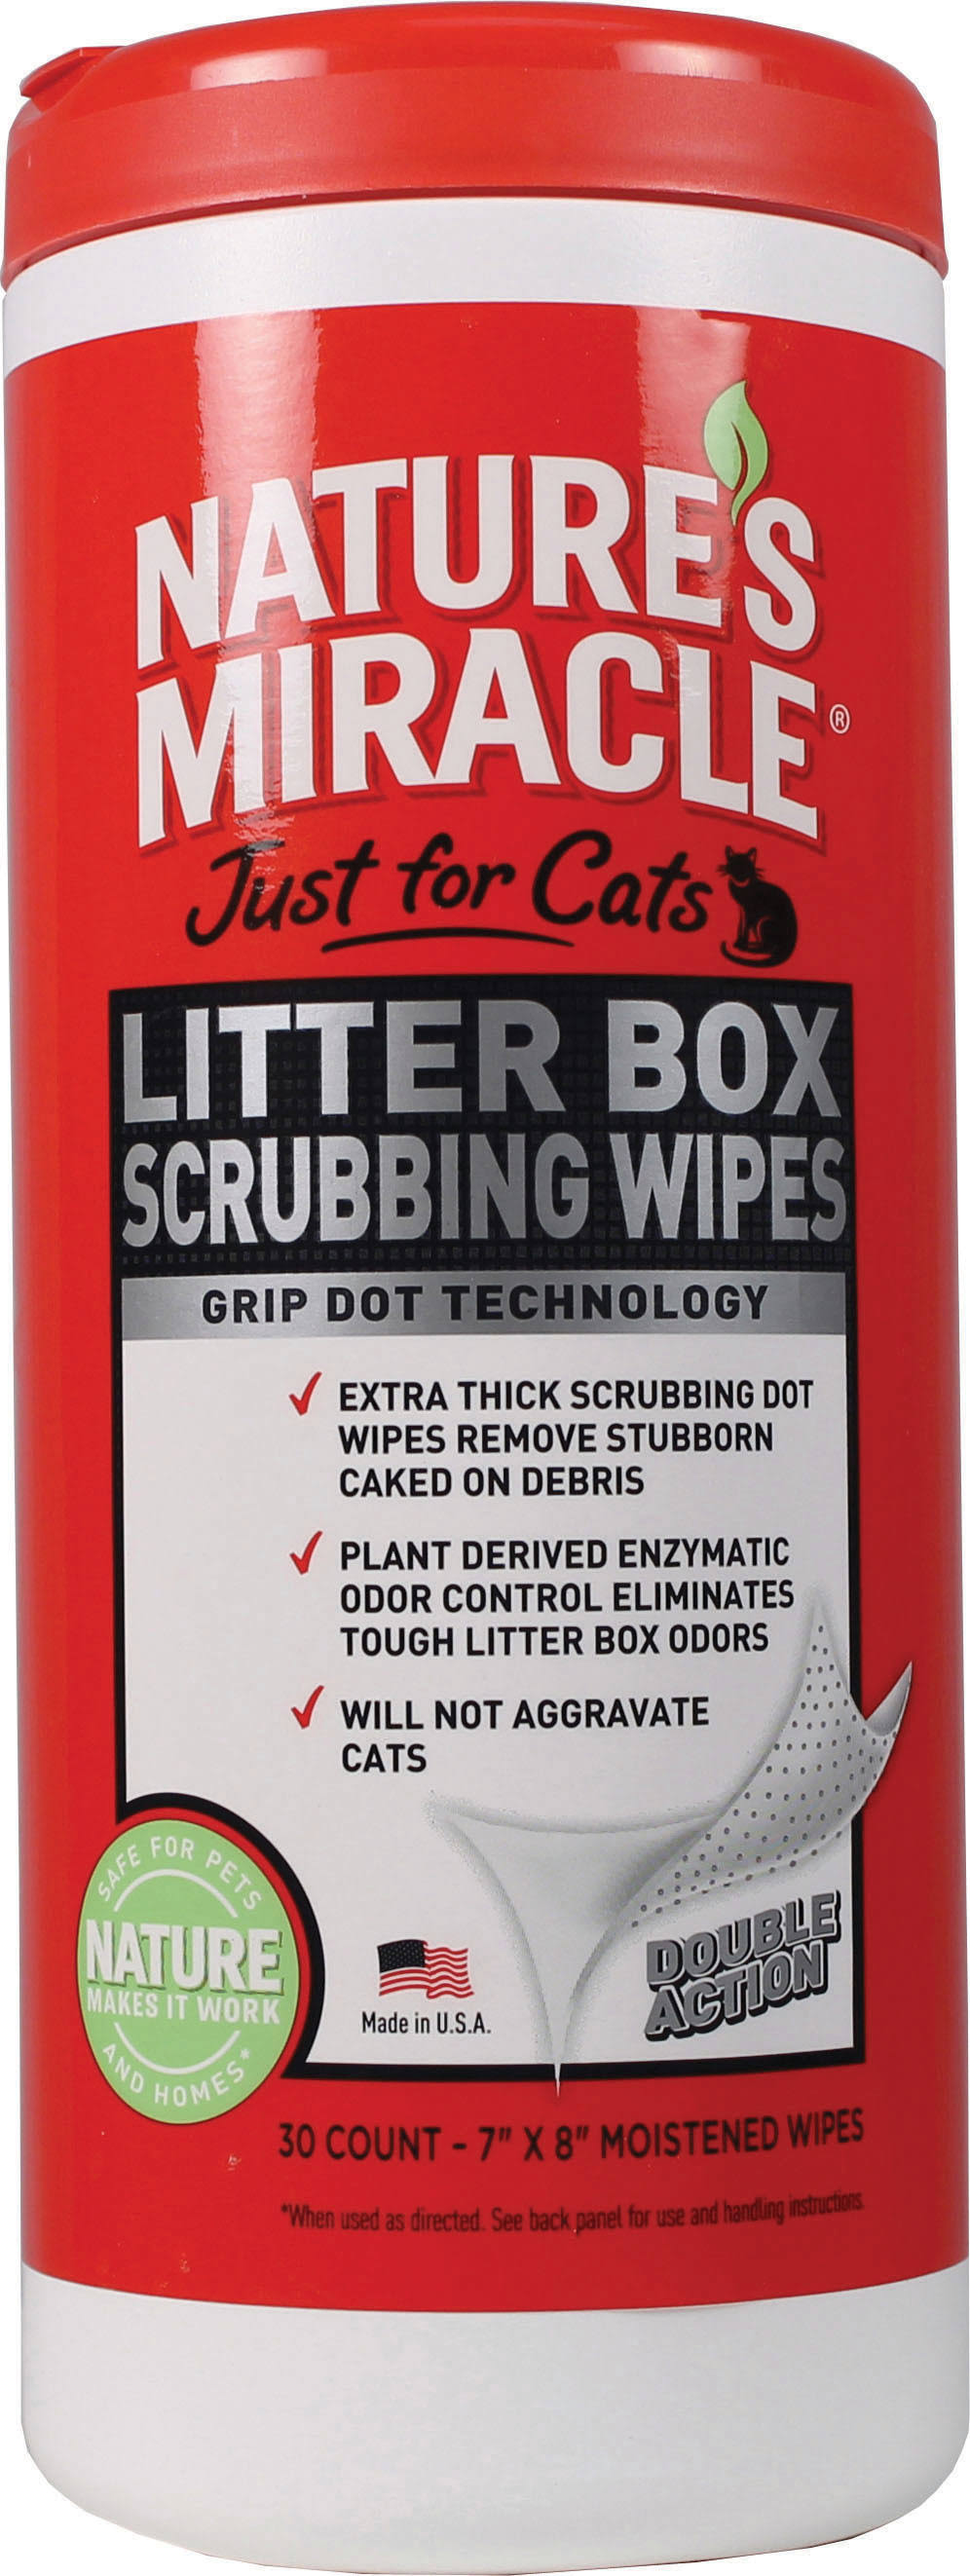 Nature's Miracle Just for Cats Litter Box Scrubbing Wipes - 30ct